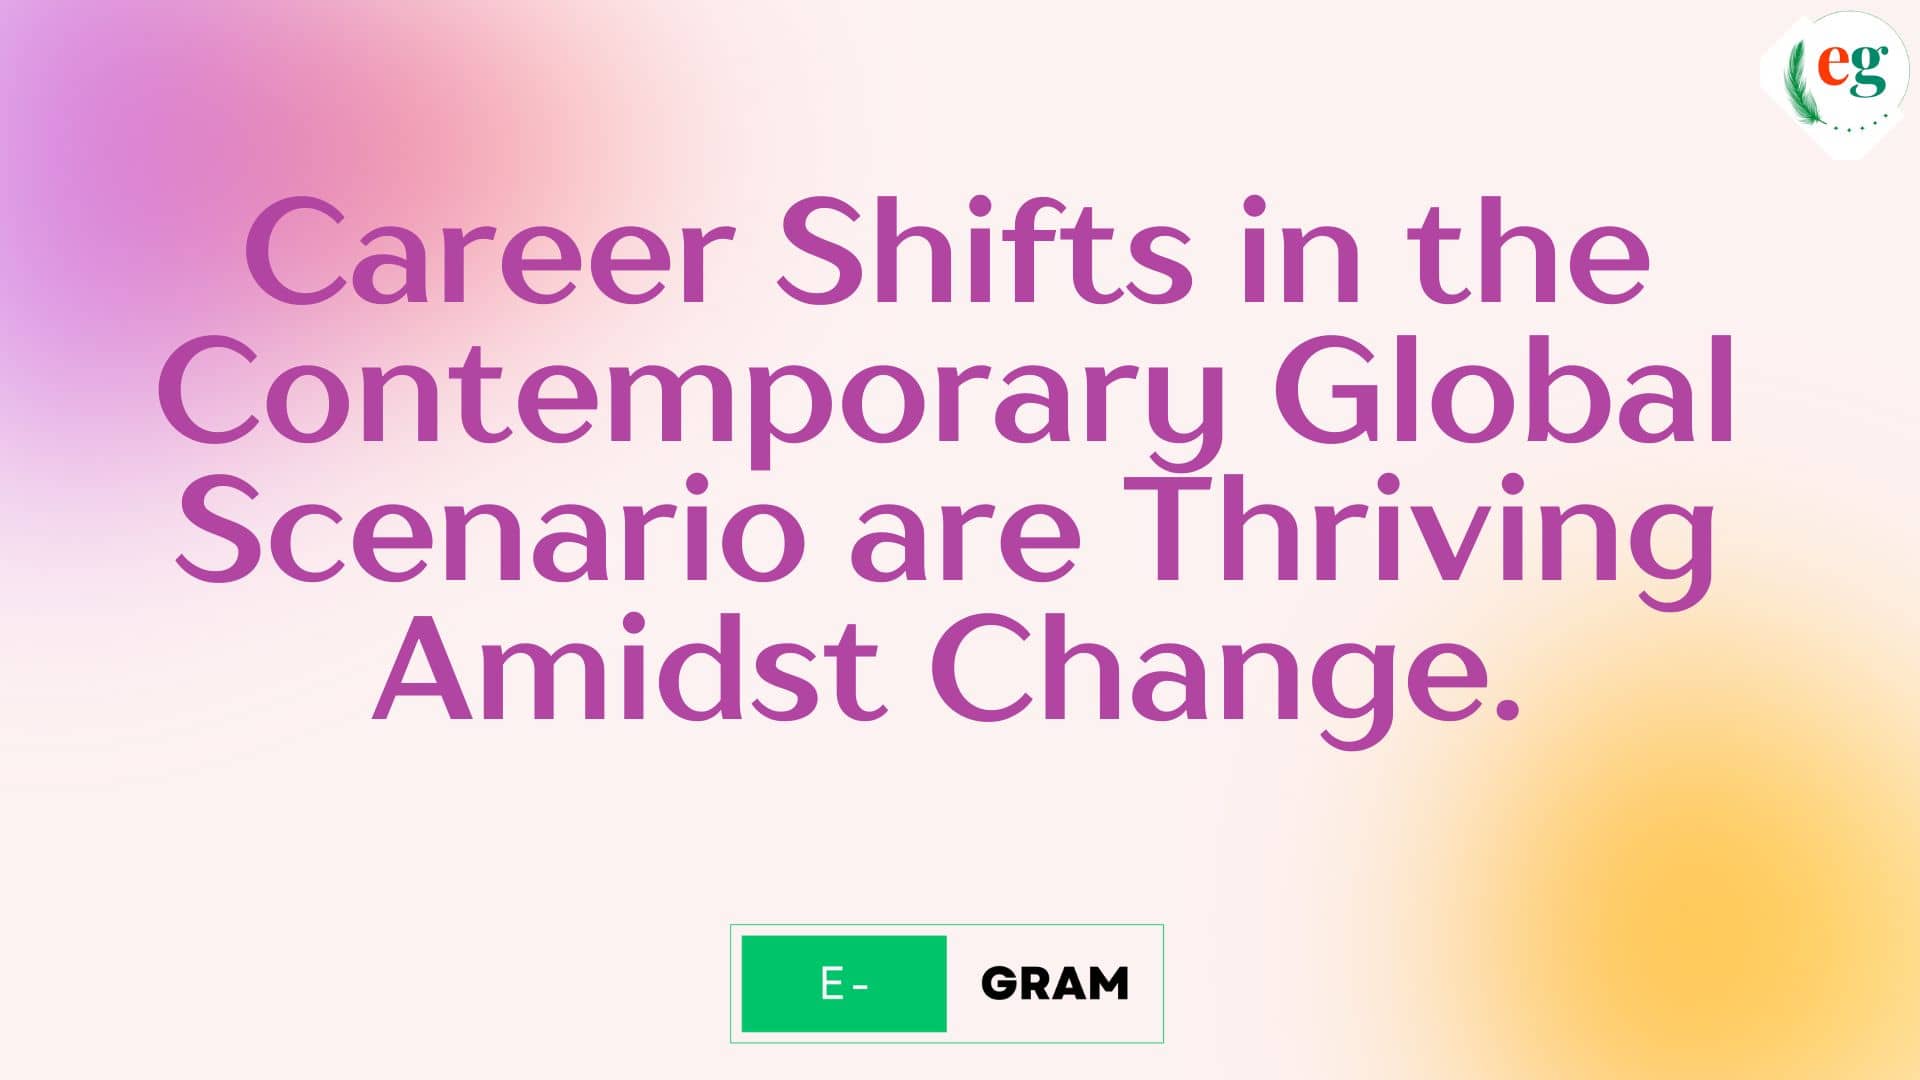 Career Shifts in the Contemporary Global Scenario are Thriving Amidst Change.